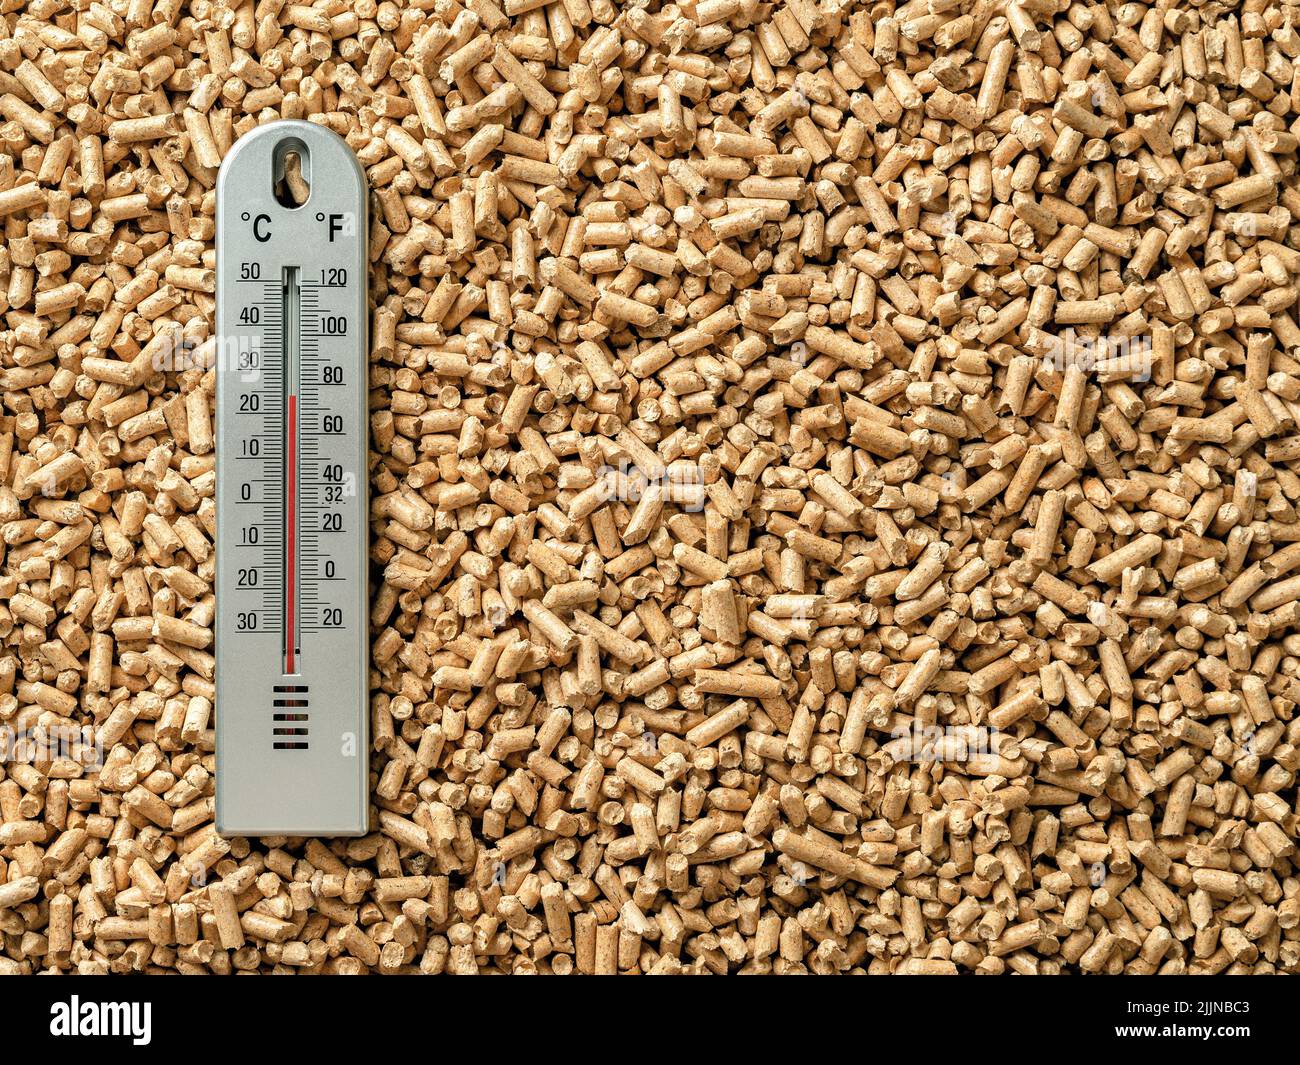 Air thermometer over wood pellets background. Ecological home heating with organic biofuel from compressed sawdust. Alternative renewable energy. Stock Photo